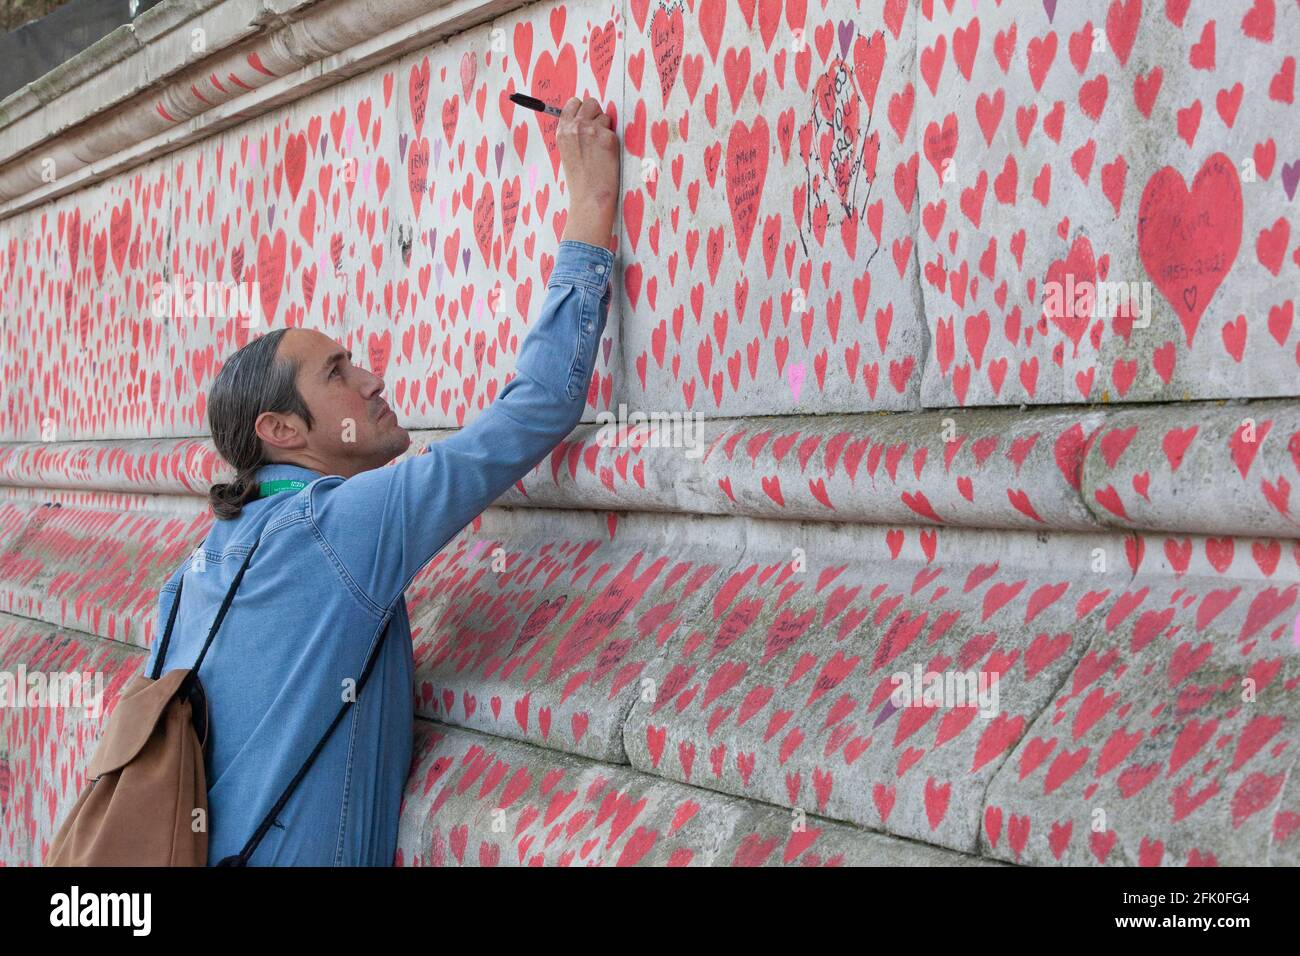 London, UK, 27 April 2021: Clifford Kelly writes on the National Covid Memorial Wall in tribute to his father, George Kelly, who died on 9 January 2021 age 63. Prime Minister Boris Johnson faces allegations he would have let 'bodies pile up'. With one heart drawn for each of the over 150,000 people who died in the UK coronavirus pandemic, the memorial stretches along the wall of St Thomas's Hospital, facing the Houses of Parliament on the opposite bank of the River Thames. Anna Watson/Alamy Live News Stock Photo